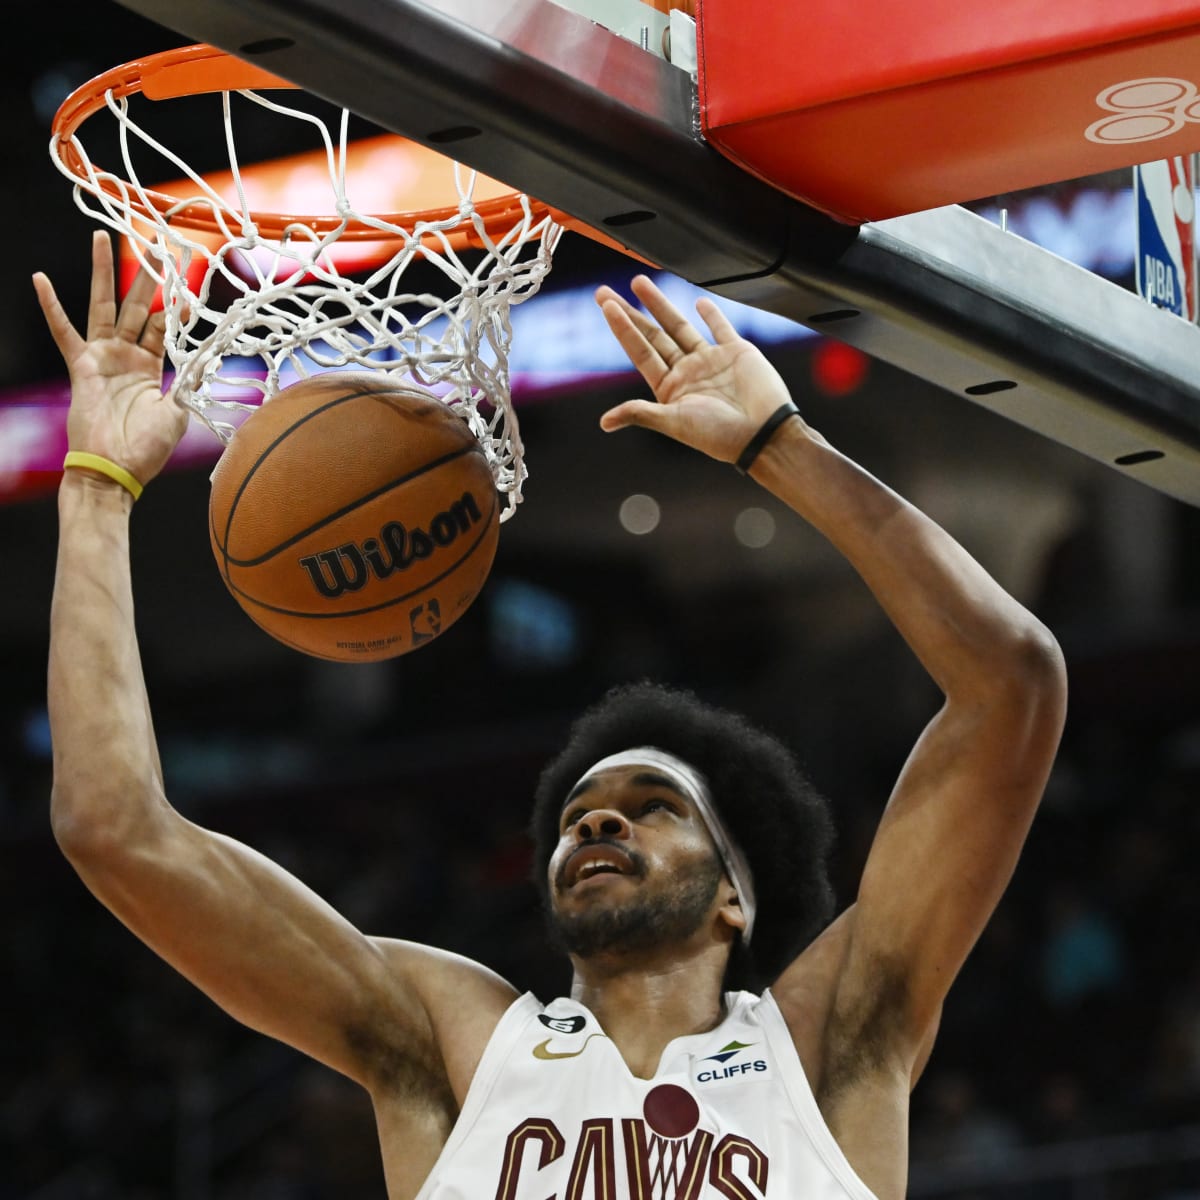 Jarrett Allen sidelined for Cleveland Cavaliers with ankle injury